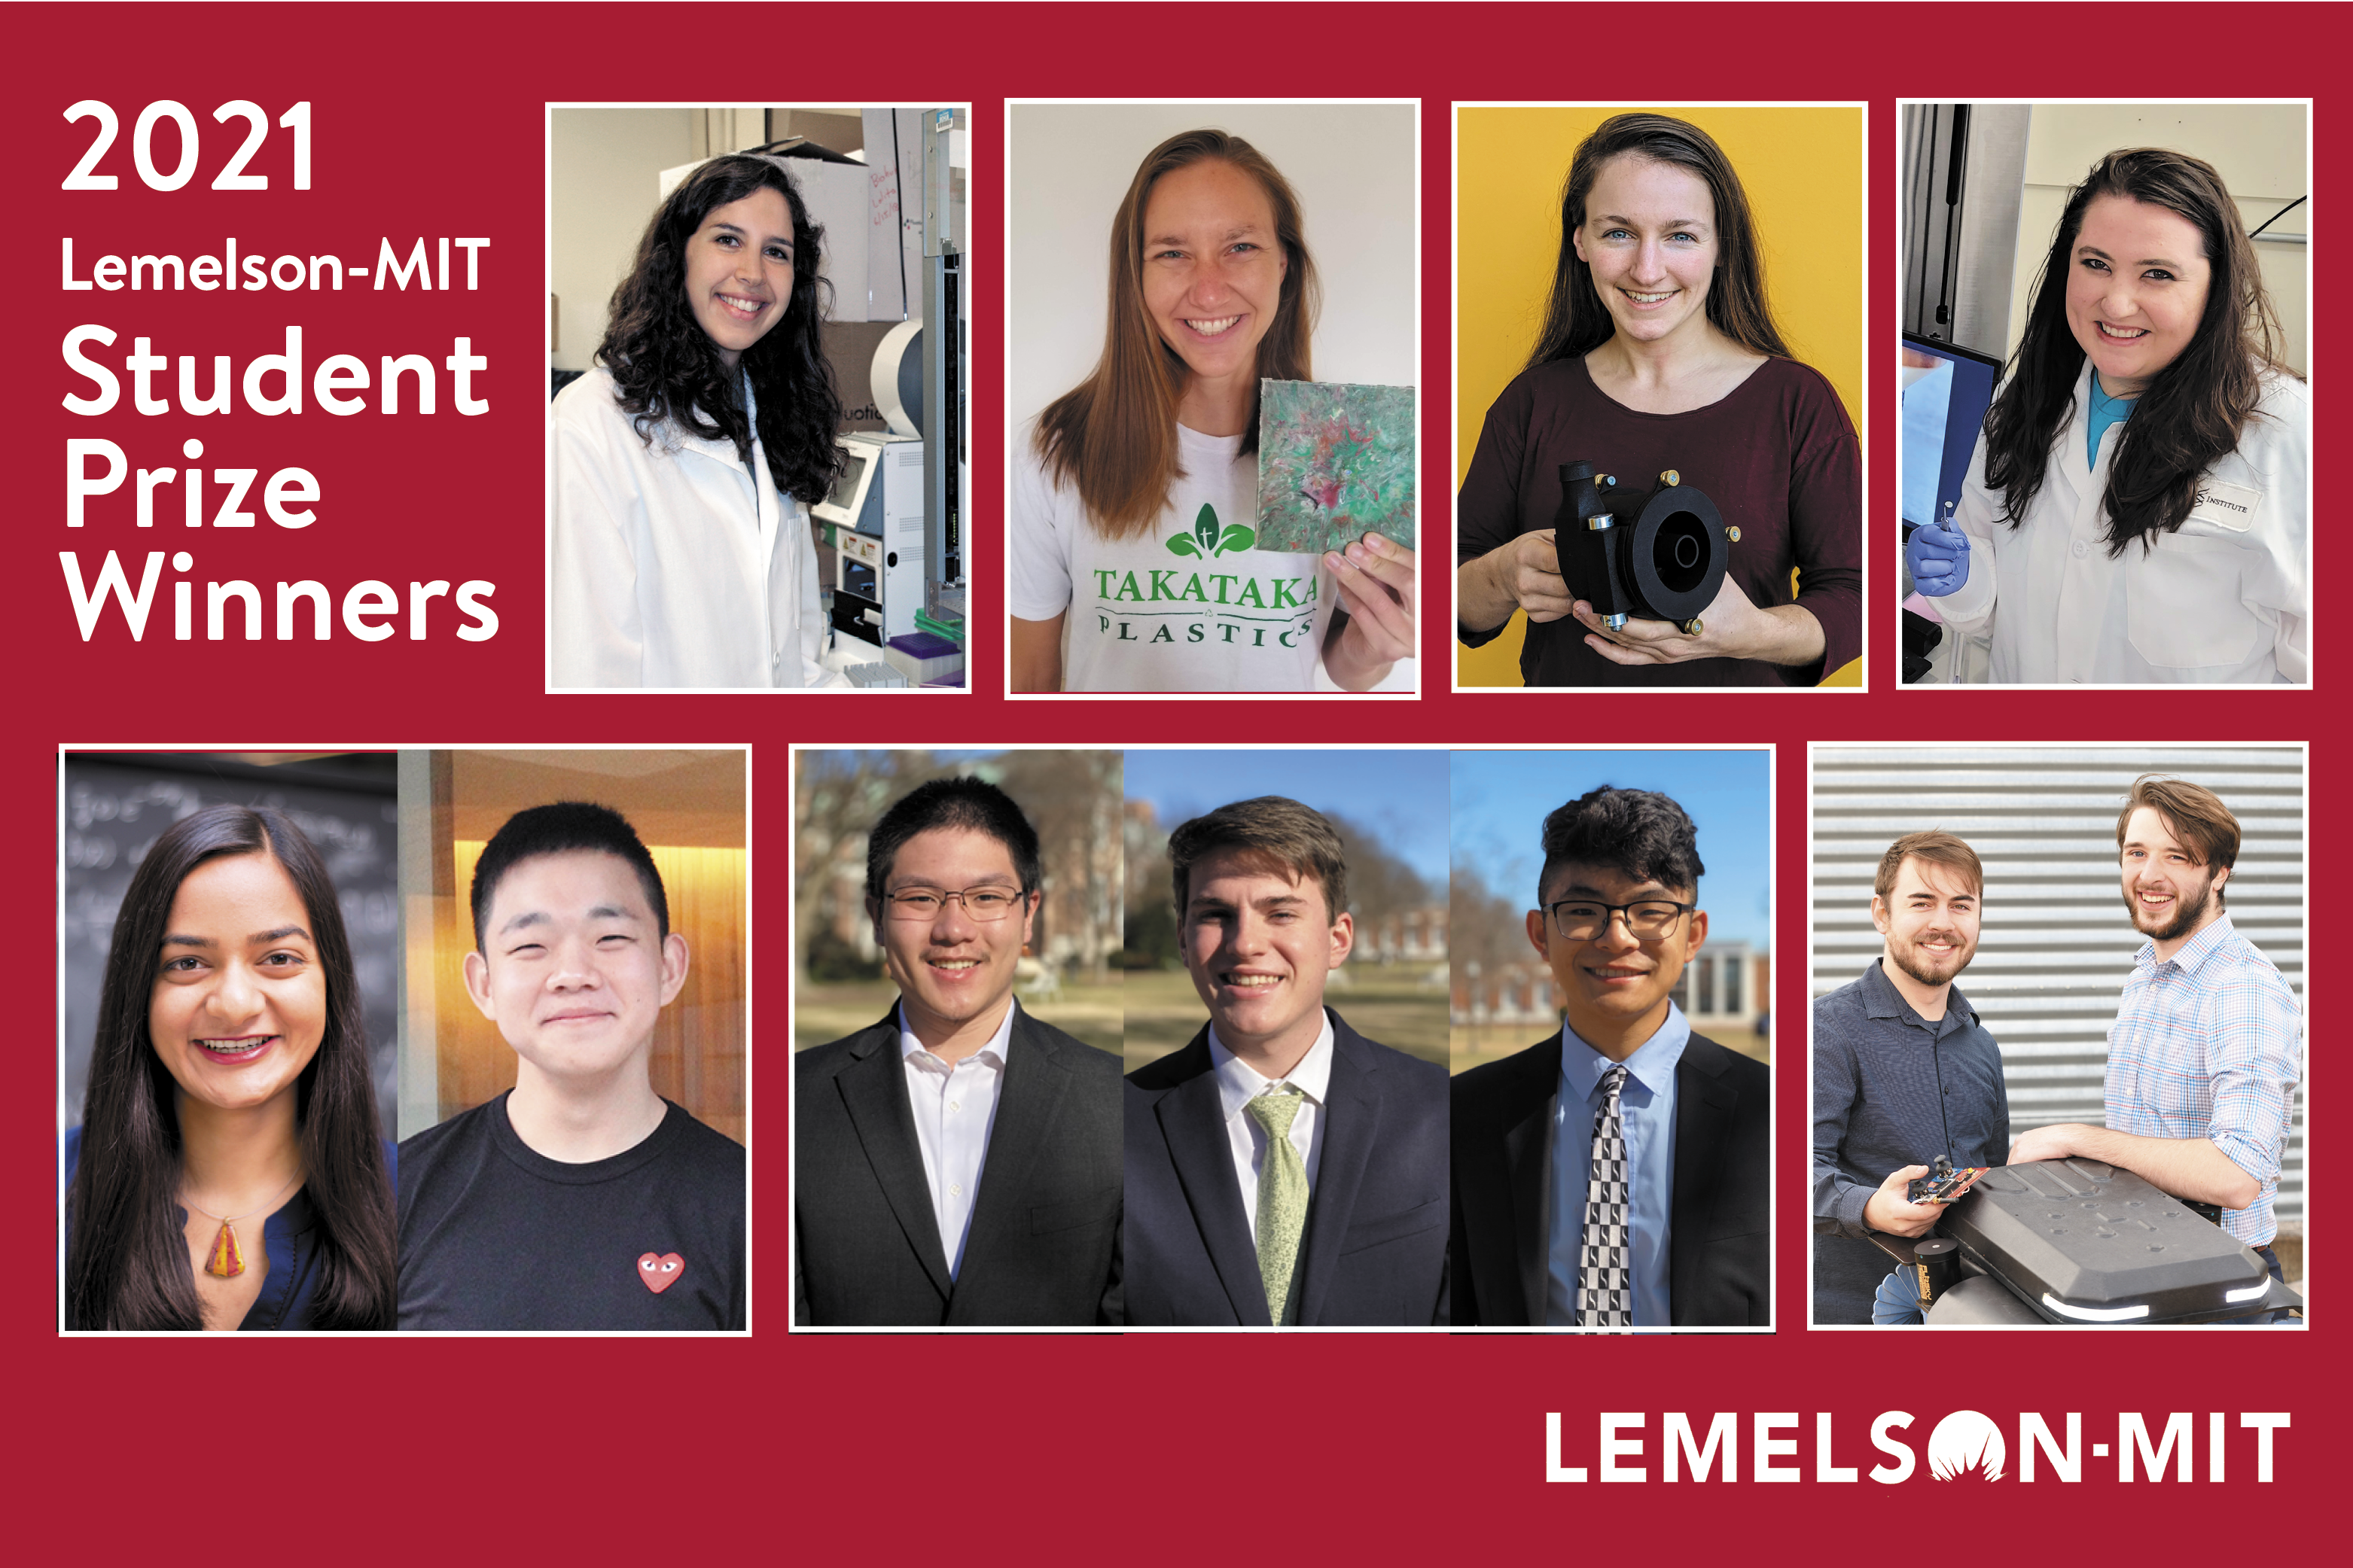 Top collegiate inventors awarded 2021 Lemelson-MIT Student Prize